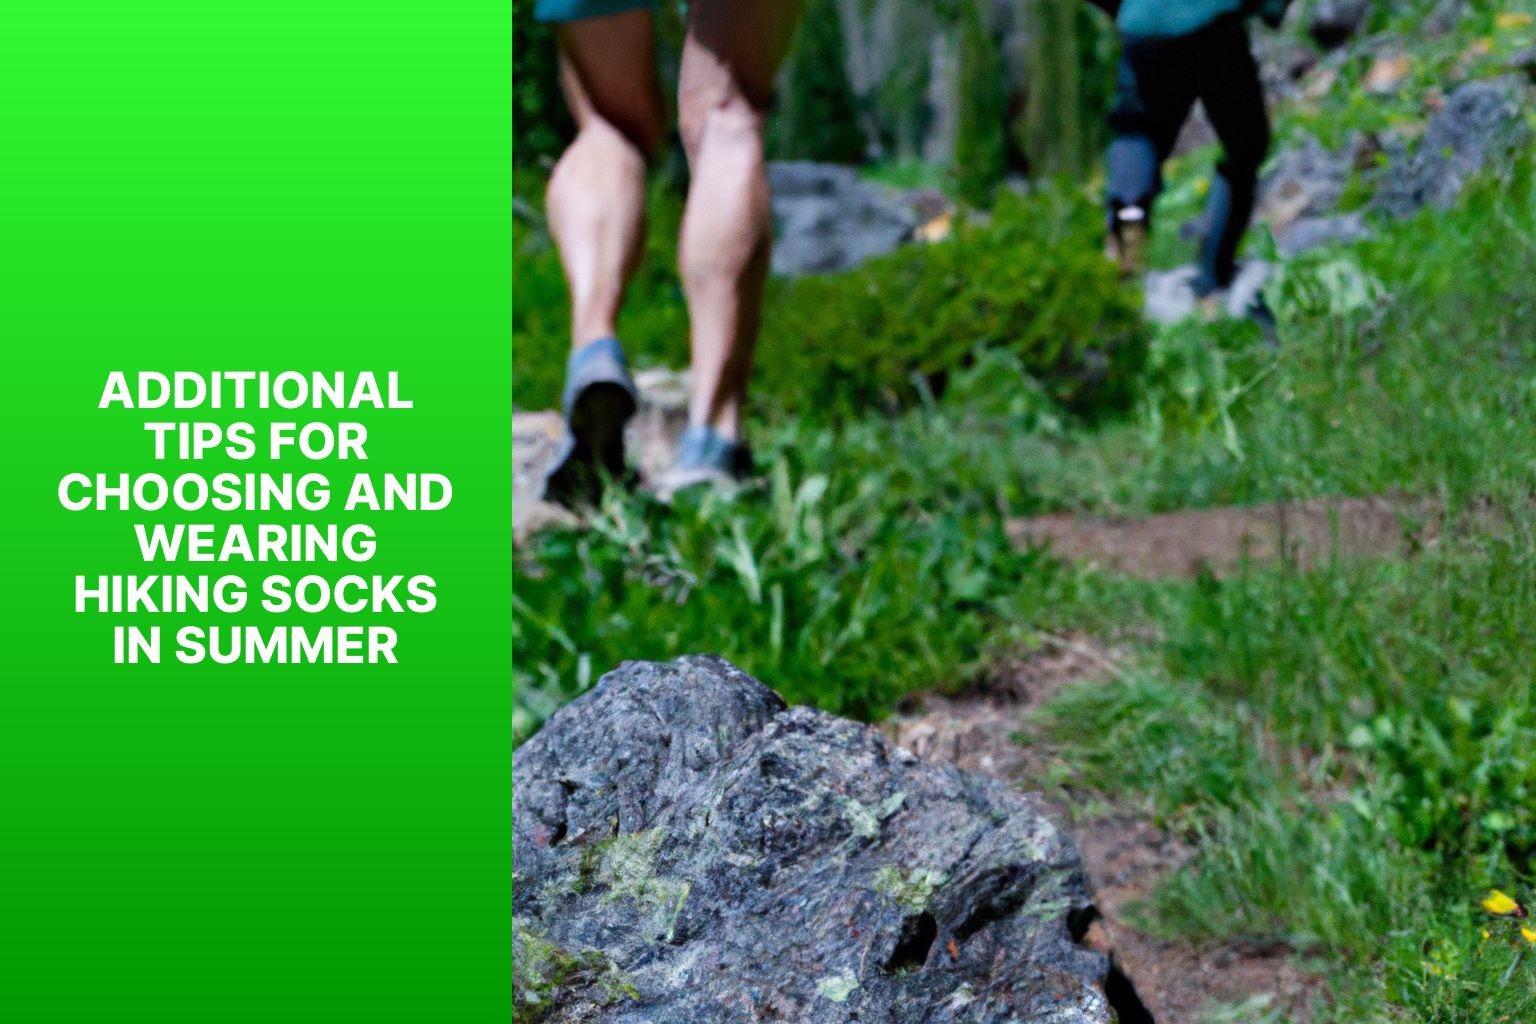 Additional Tips for Choosing and Wearing Hiking Socks in Summer - What Socks to Wear Hiking in Summer 